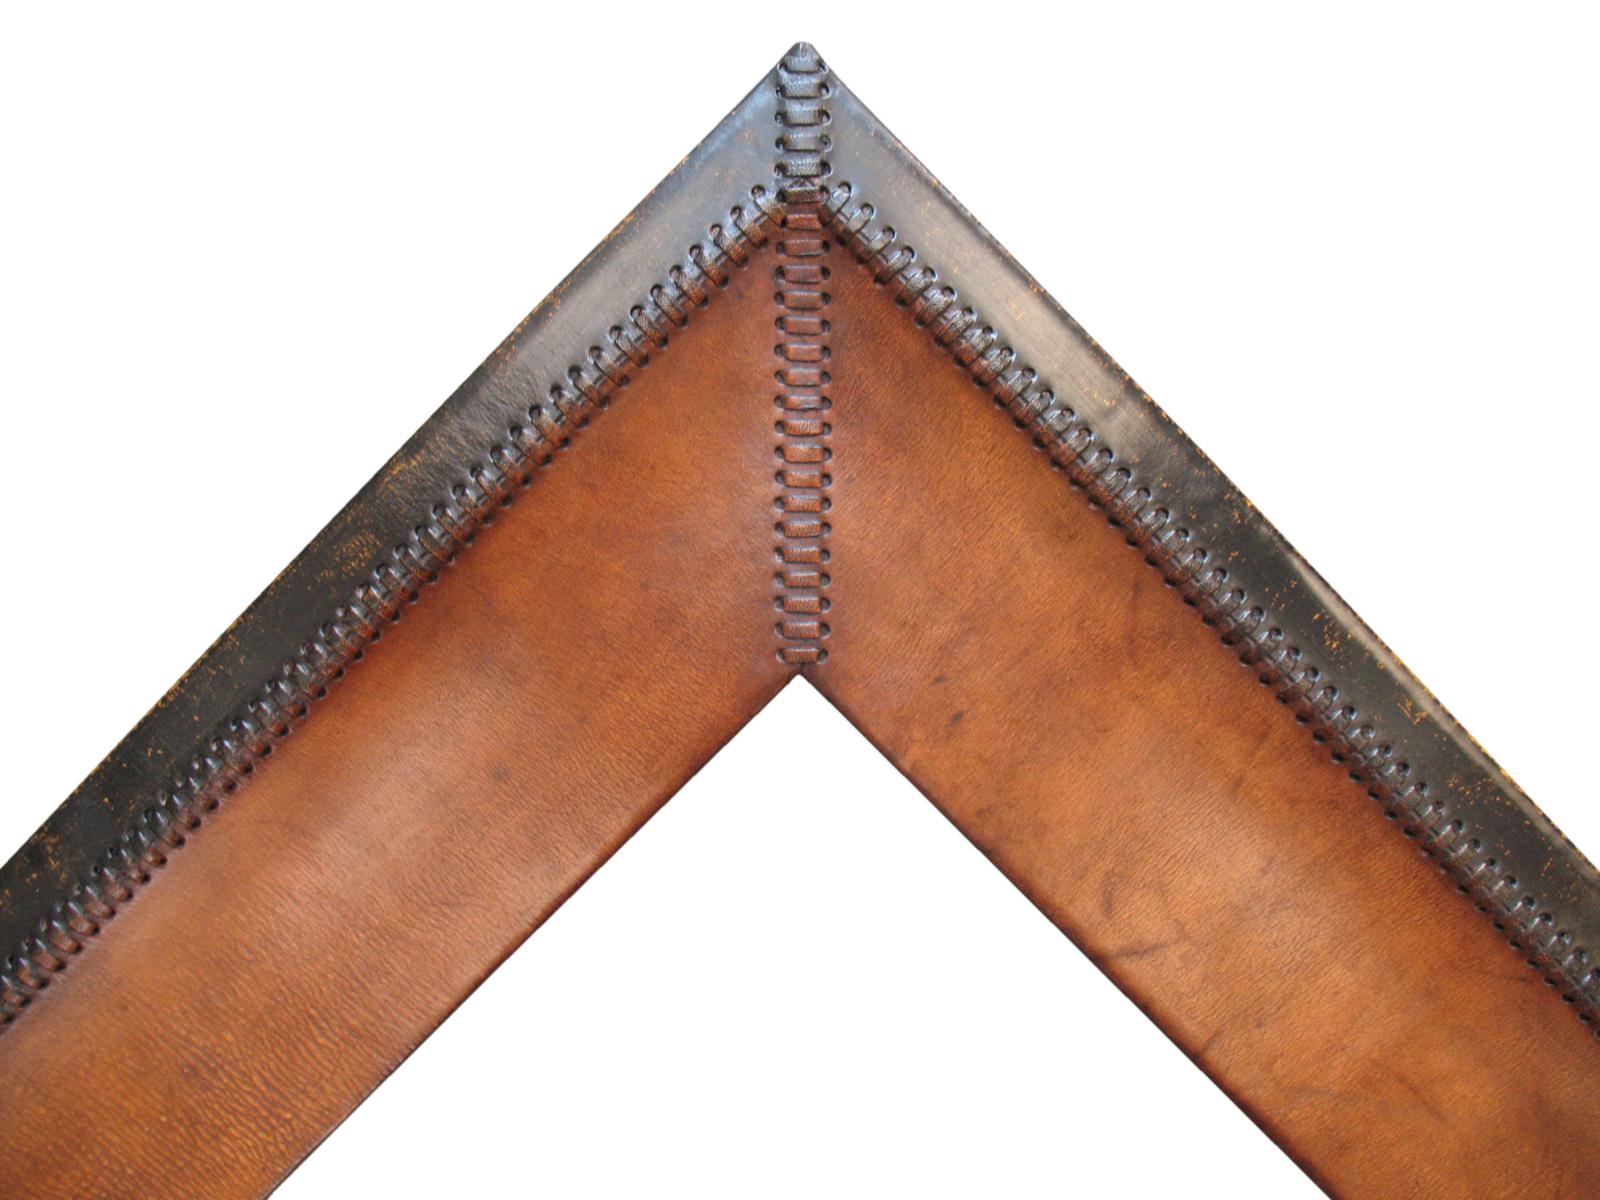 Handmade custom frame covered in natural leather and hand stitches